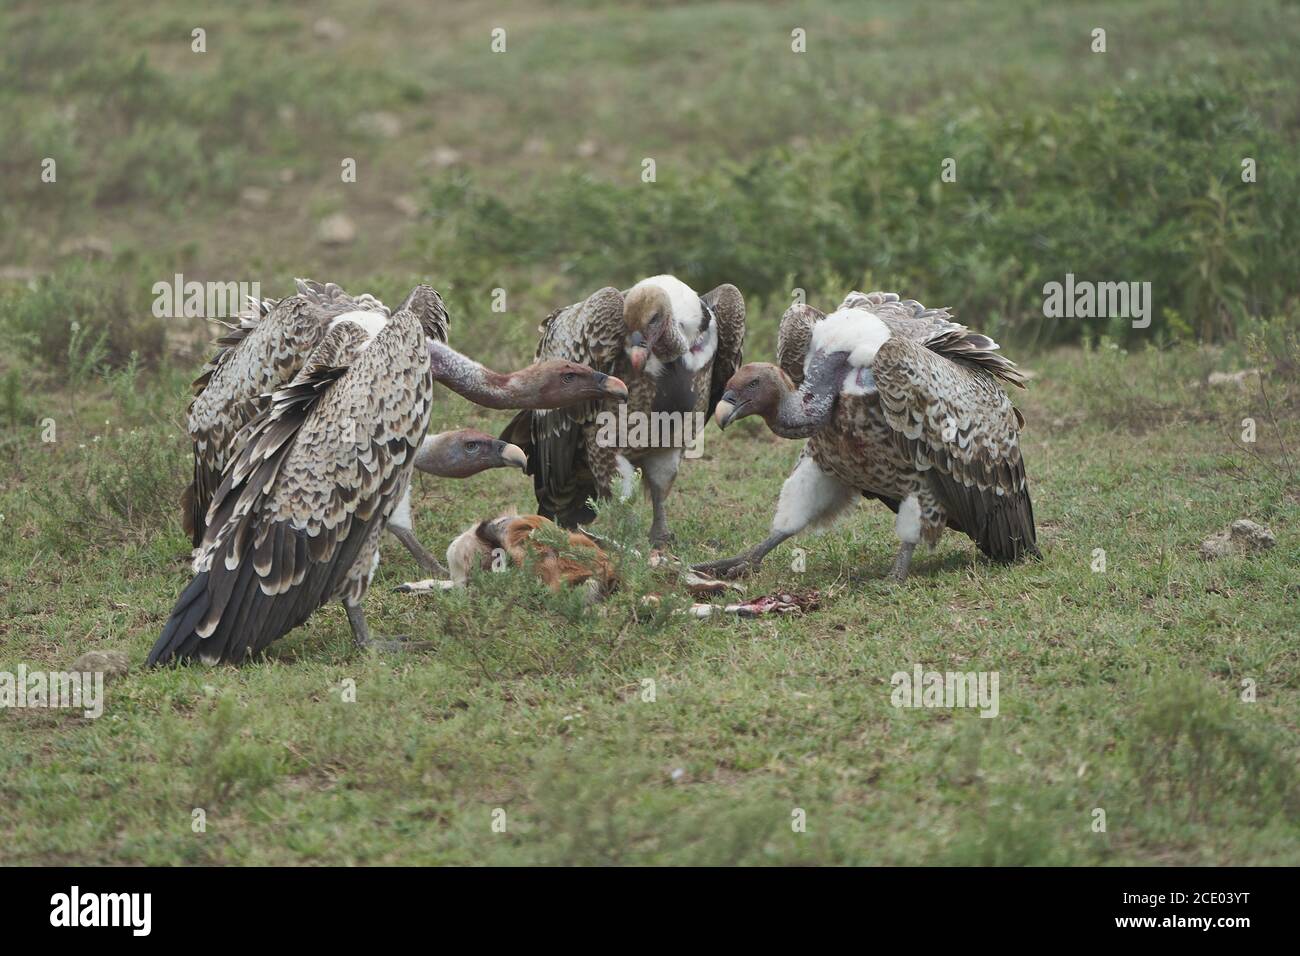 White backed vulture group Gyps africanus eating carrion impala Old World vulture family Accipitridae Stock Photo